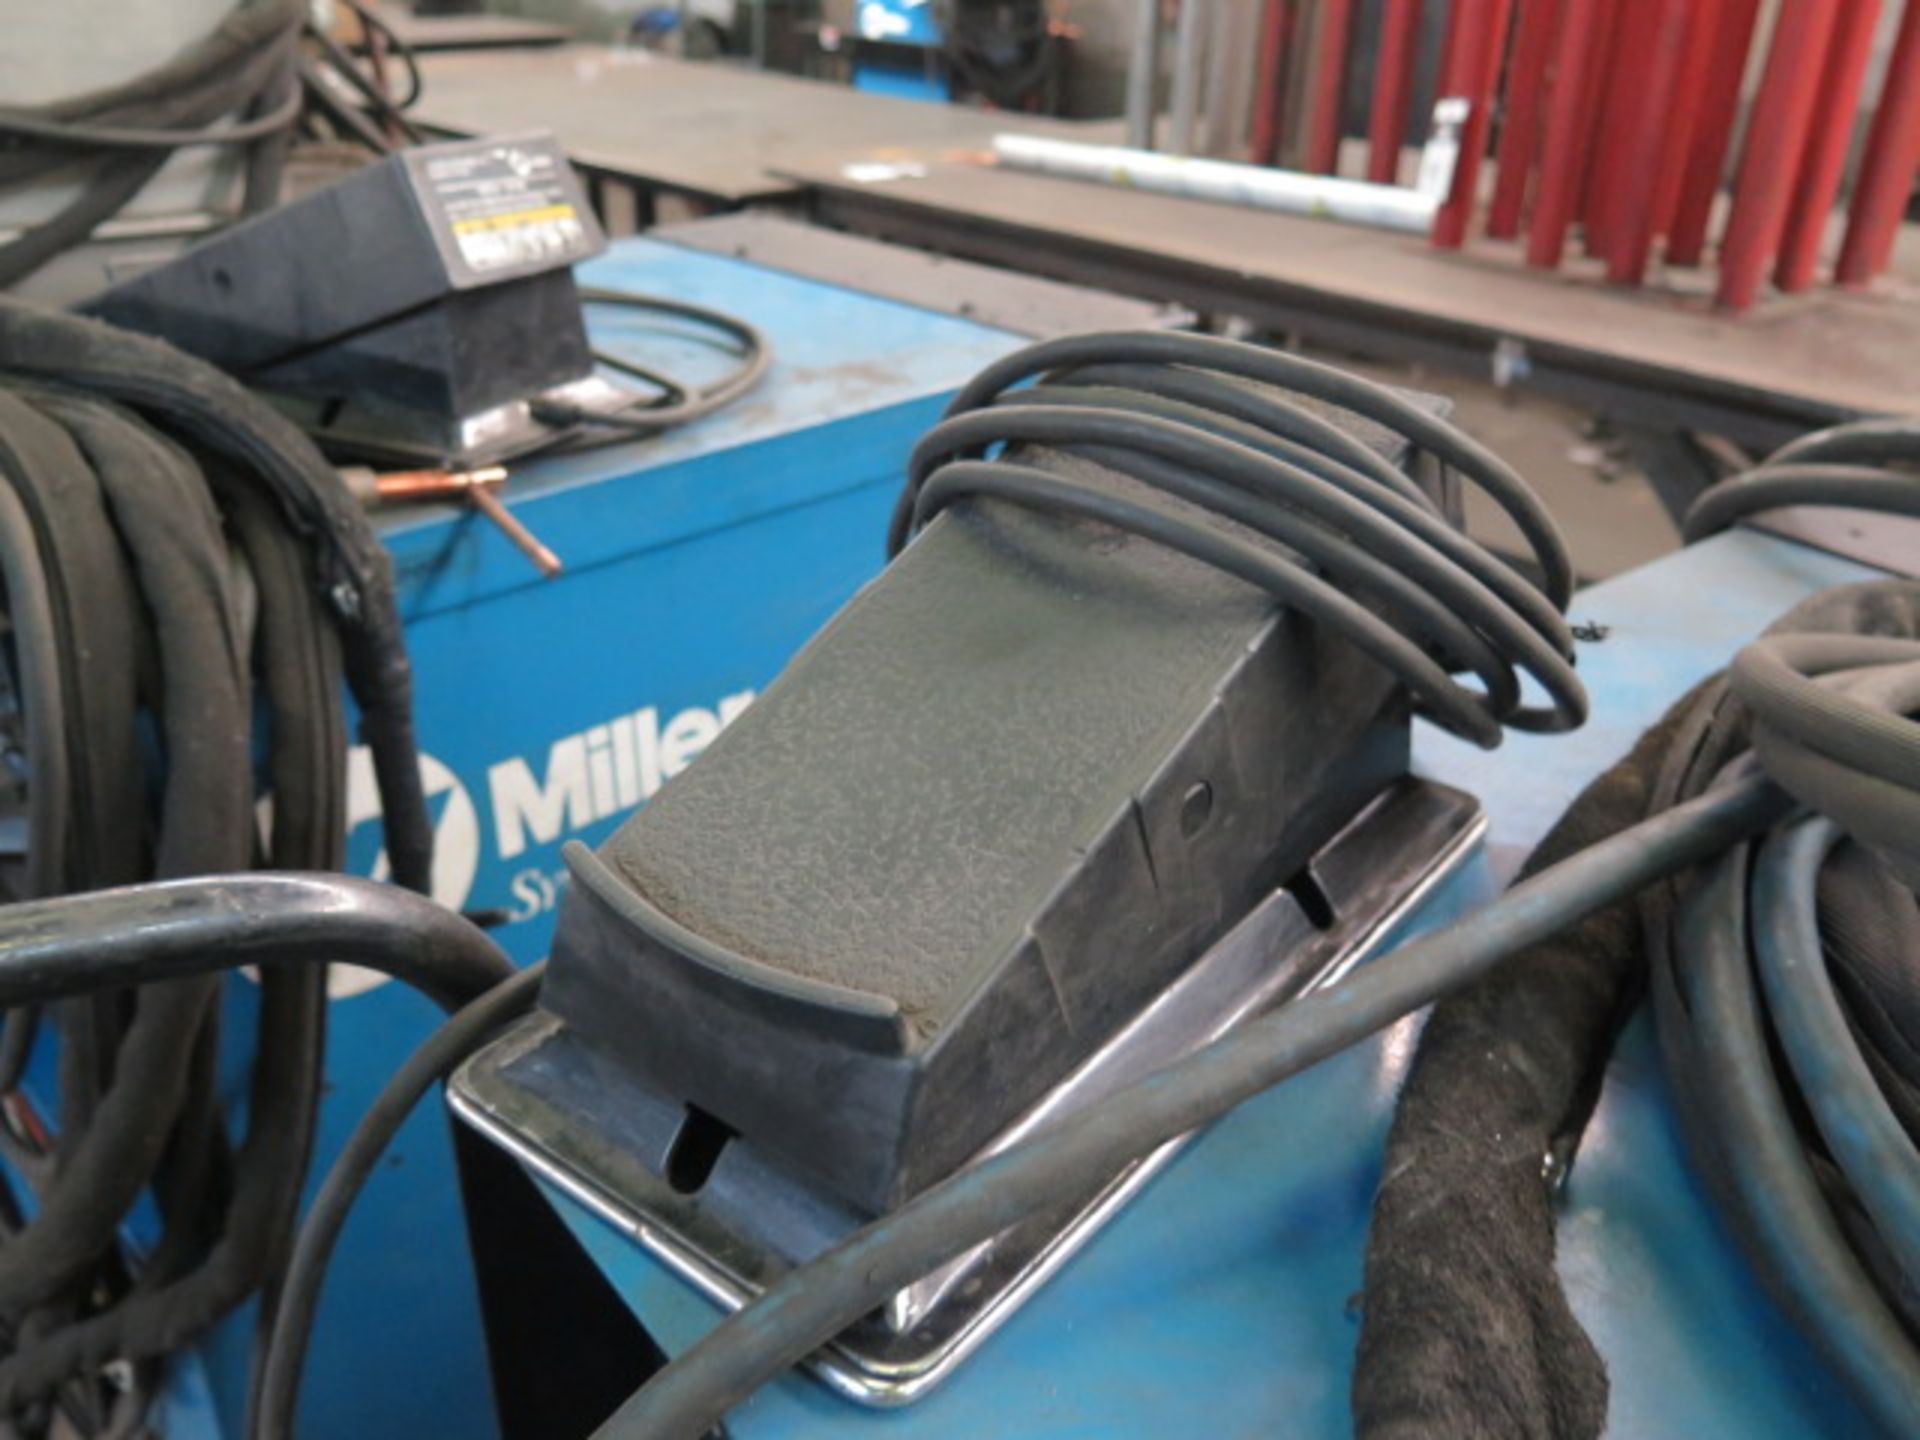 Miller Syncrowave 250 CC-AC/DC Arc welding Power Source s/n KH483474 w/ Cooler Cart SOLD AS-IS - Image 4 of 9